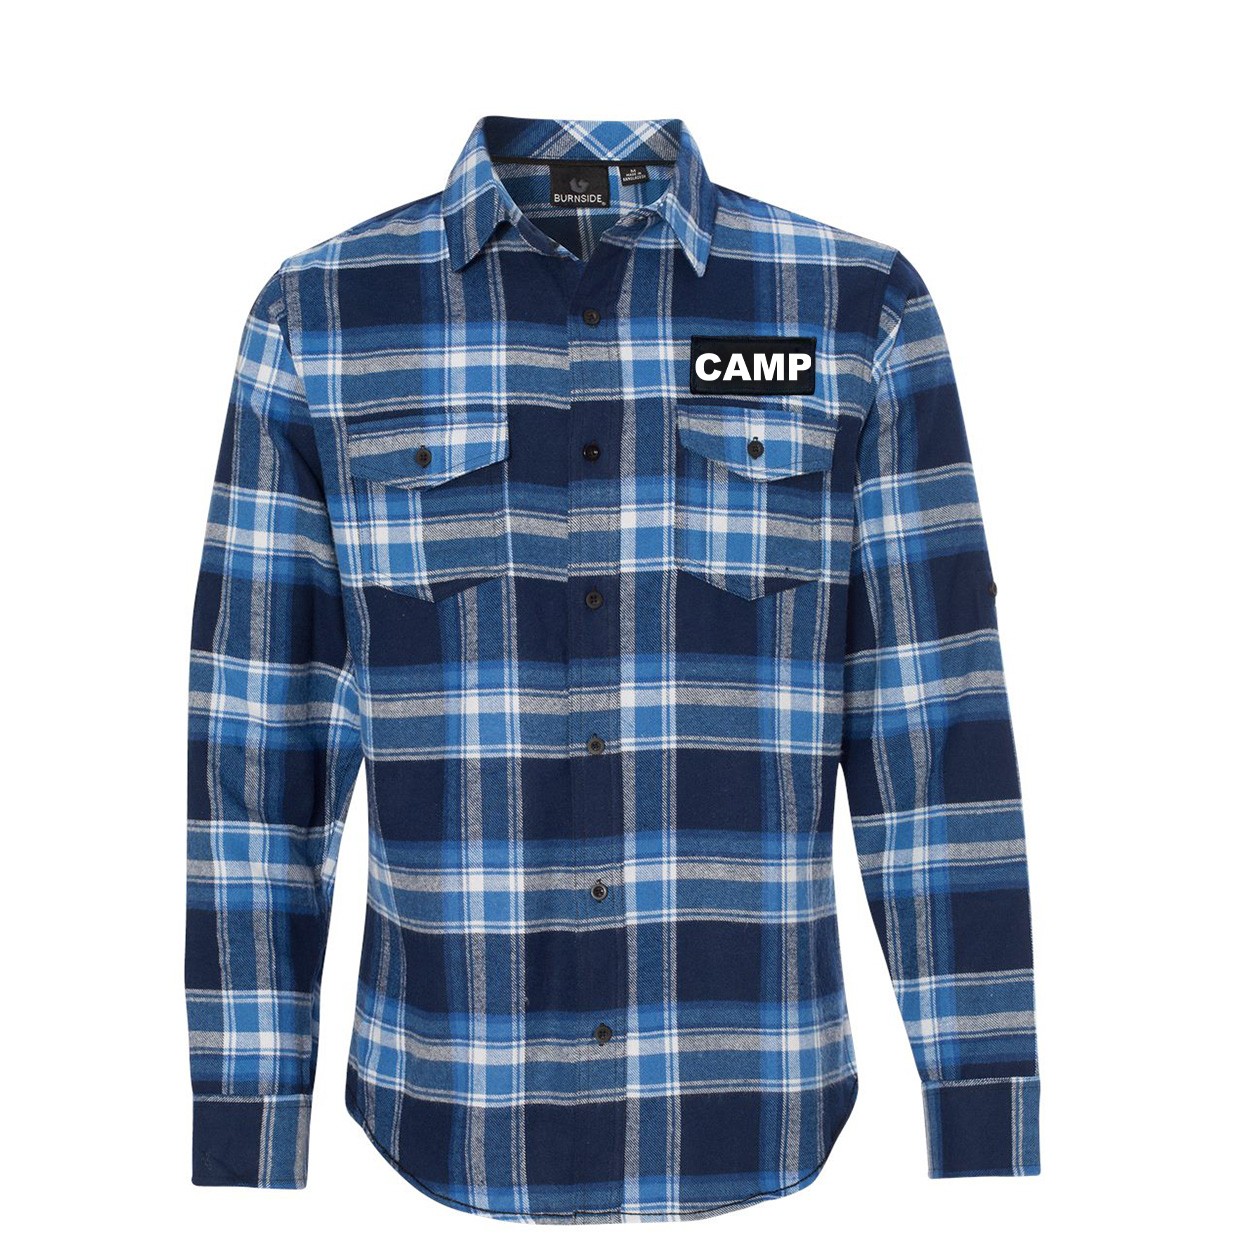 Camp Brand Logo Classic Unisex Long Sleeve Woven Patch Flannel Shirt Blue/White (White Logo)